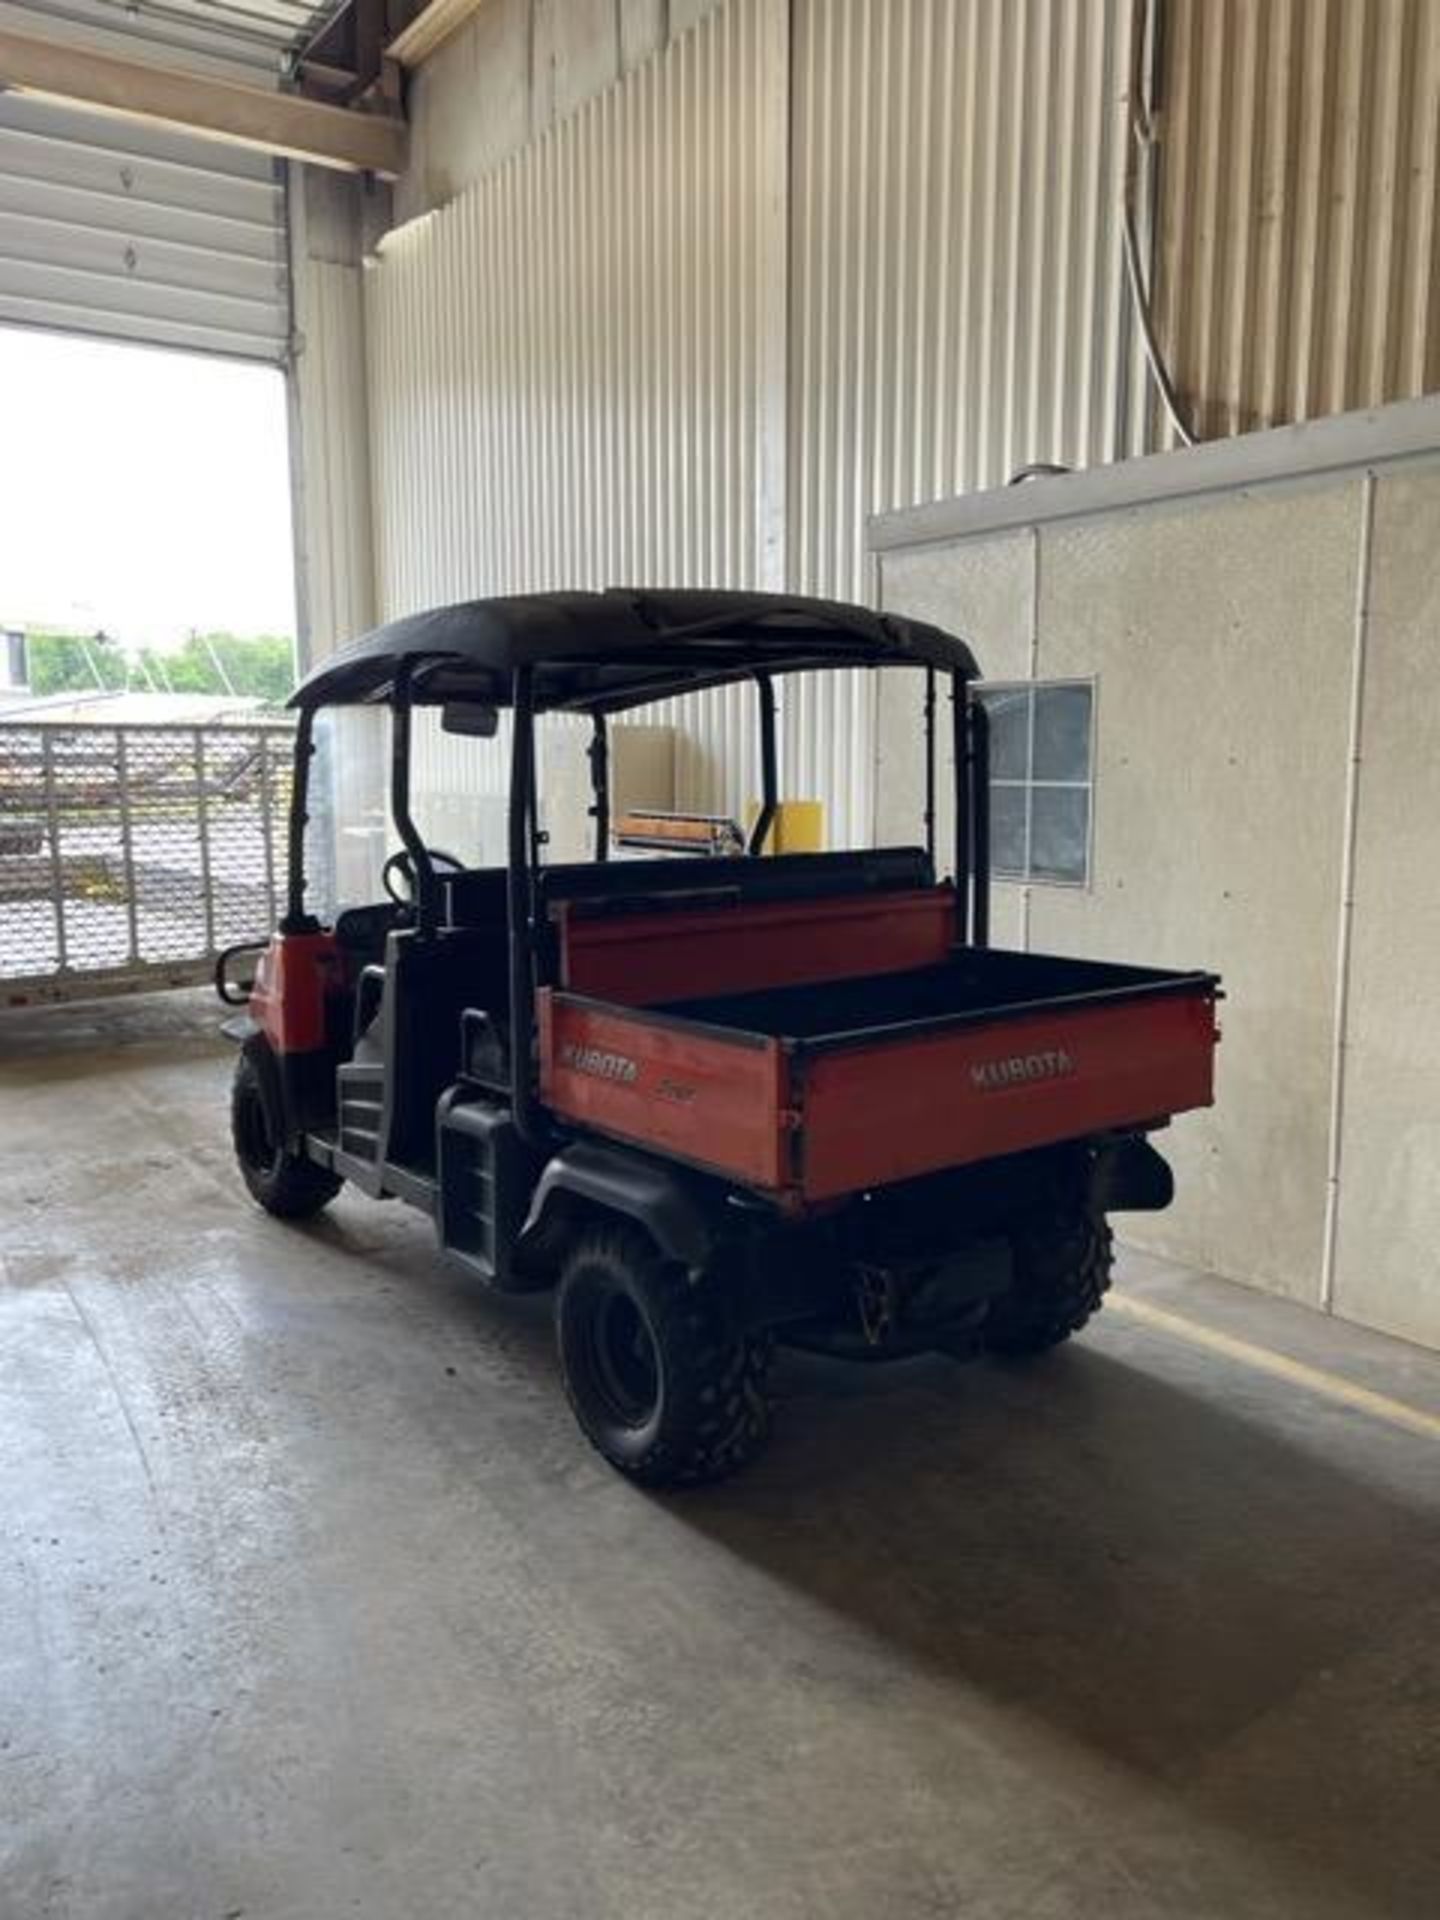 KUBOTA RTV1140 CPX DIESEL UTILITY VEHICLE, 2-ROW COLLAPSIBLE SEATING, CANOPY WITH FRONT - Image 4 of 7